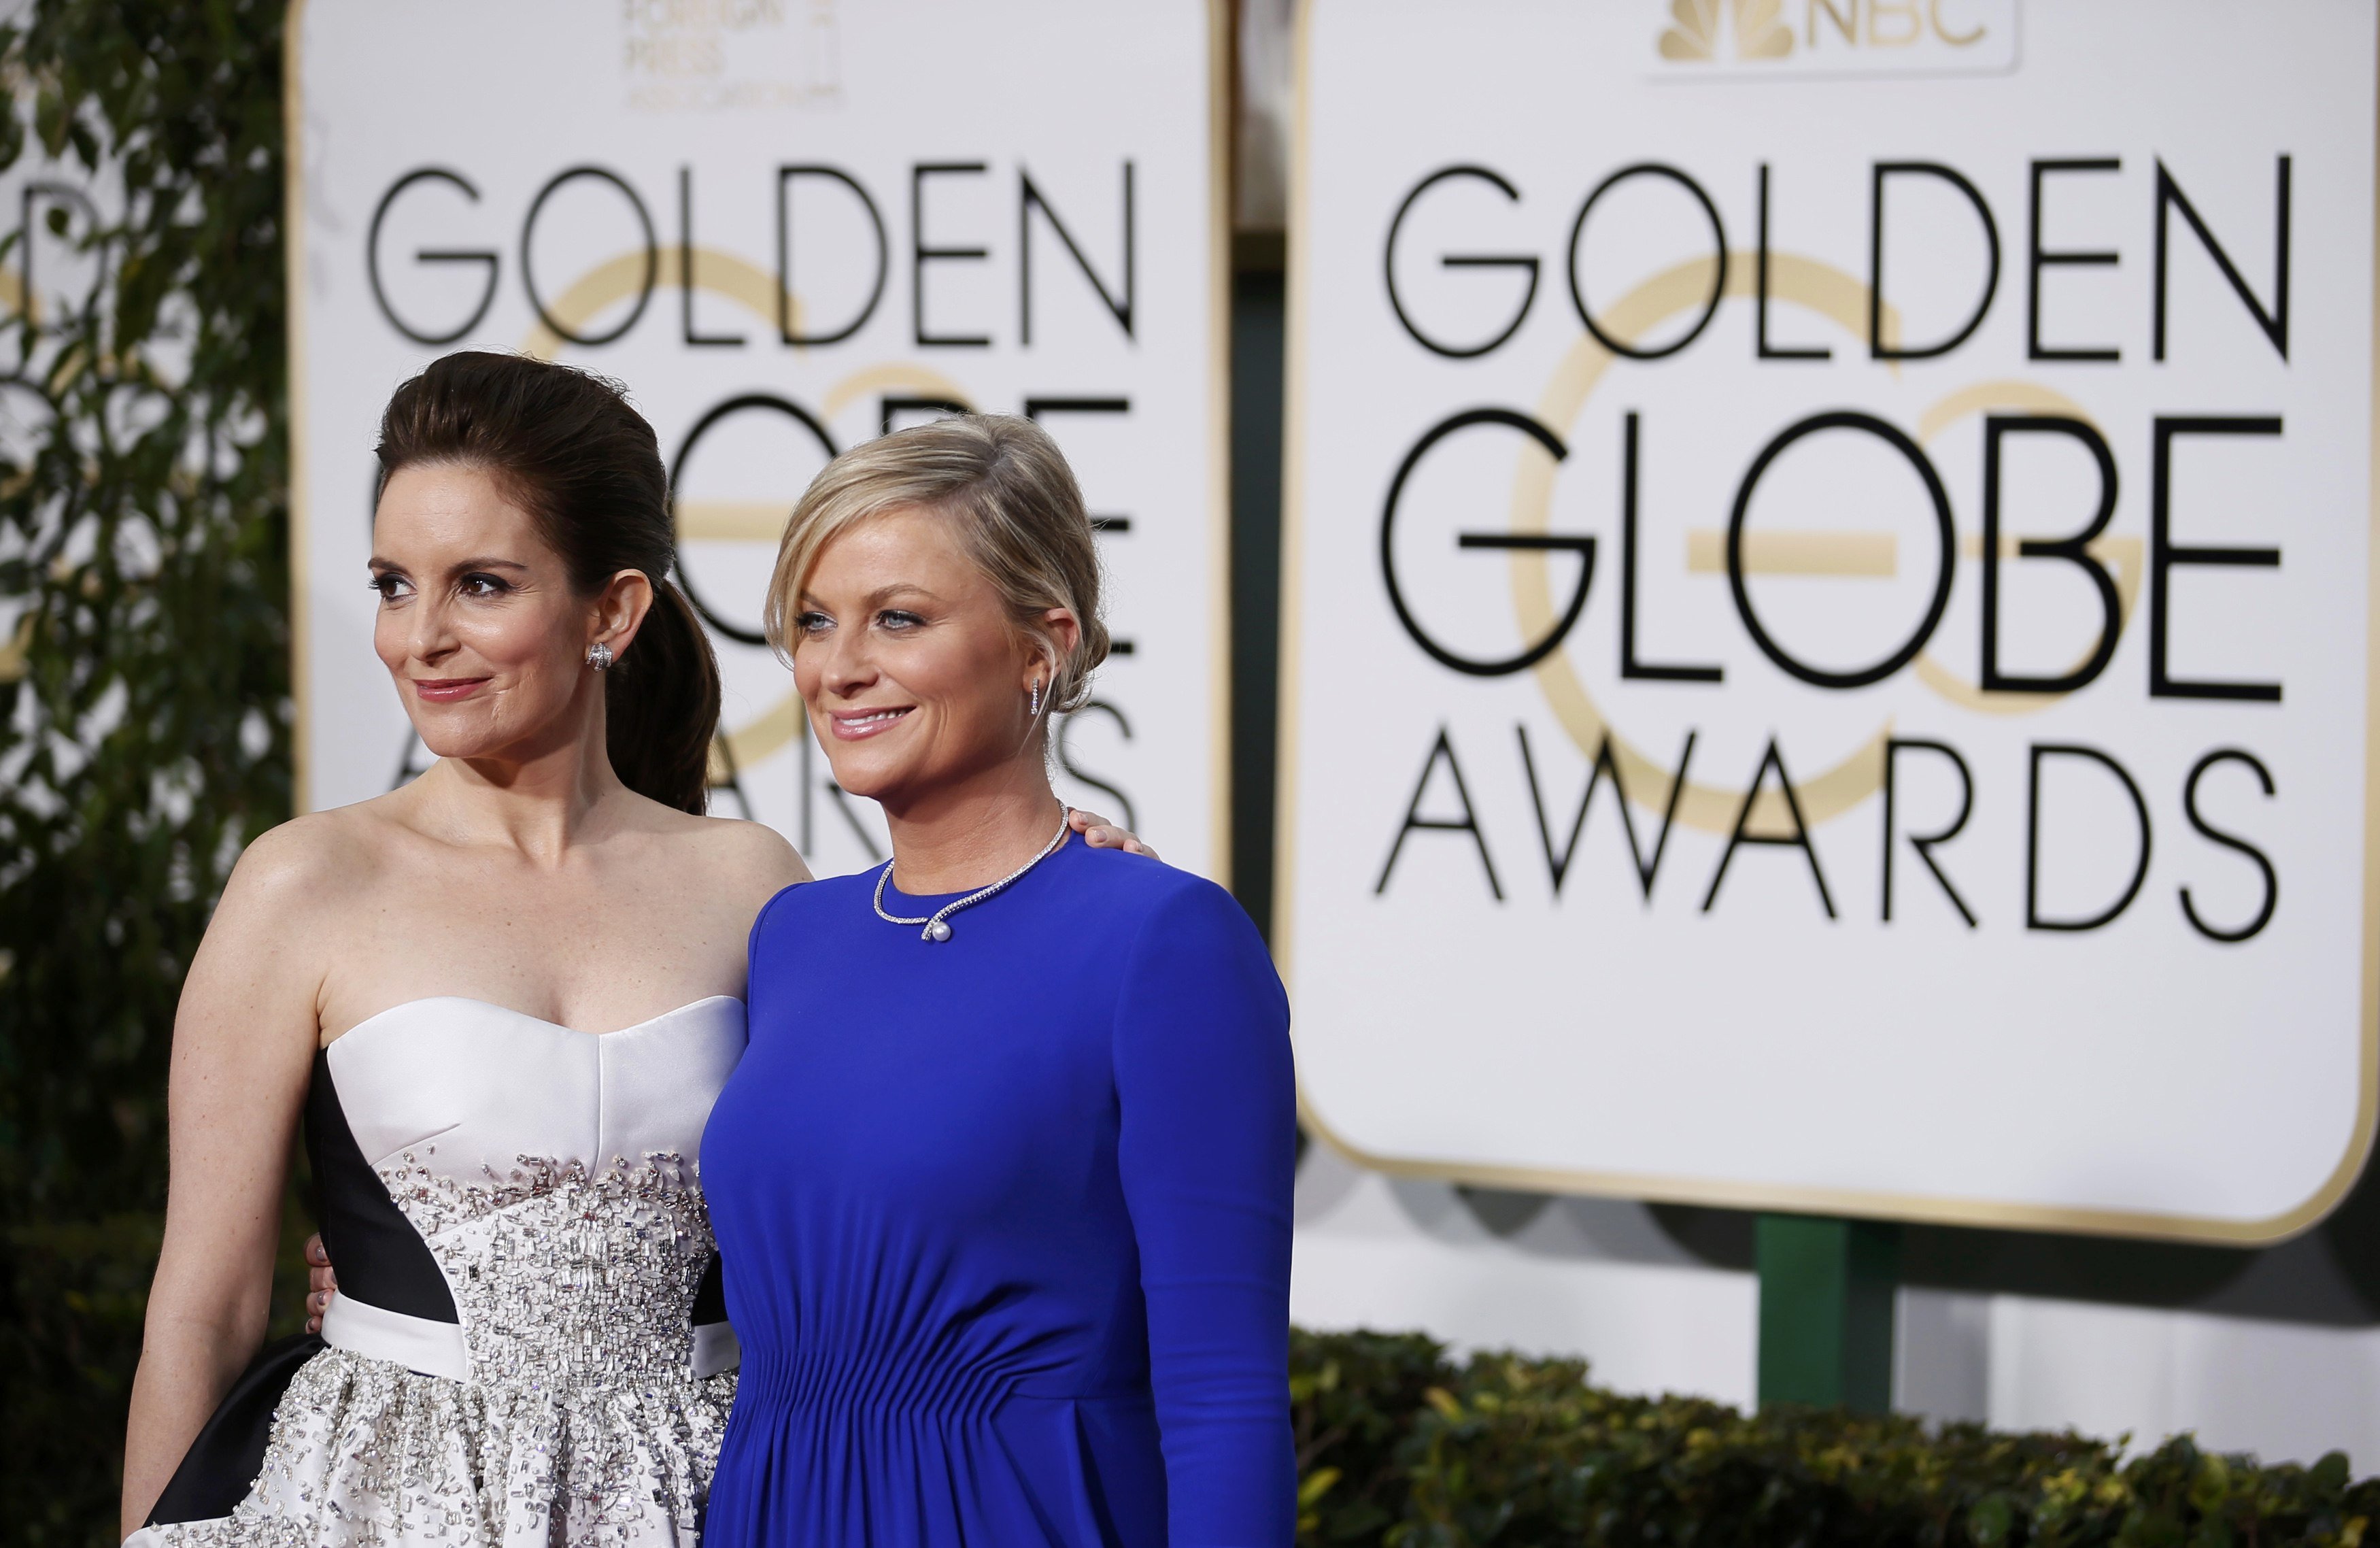 Show hosts Tina Fey and Amy Poehler arrive at the 72nd Golden Globe Awards in Beverly Hills